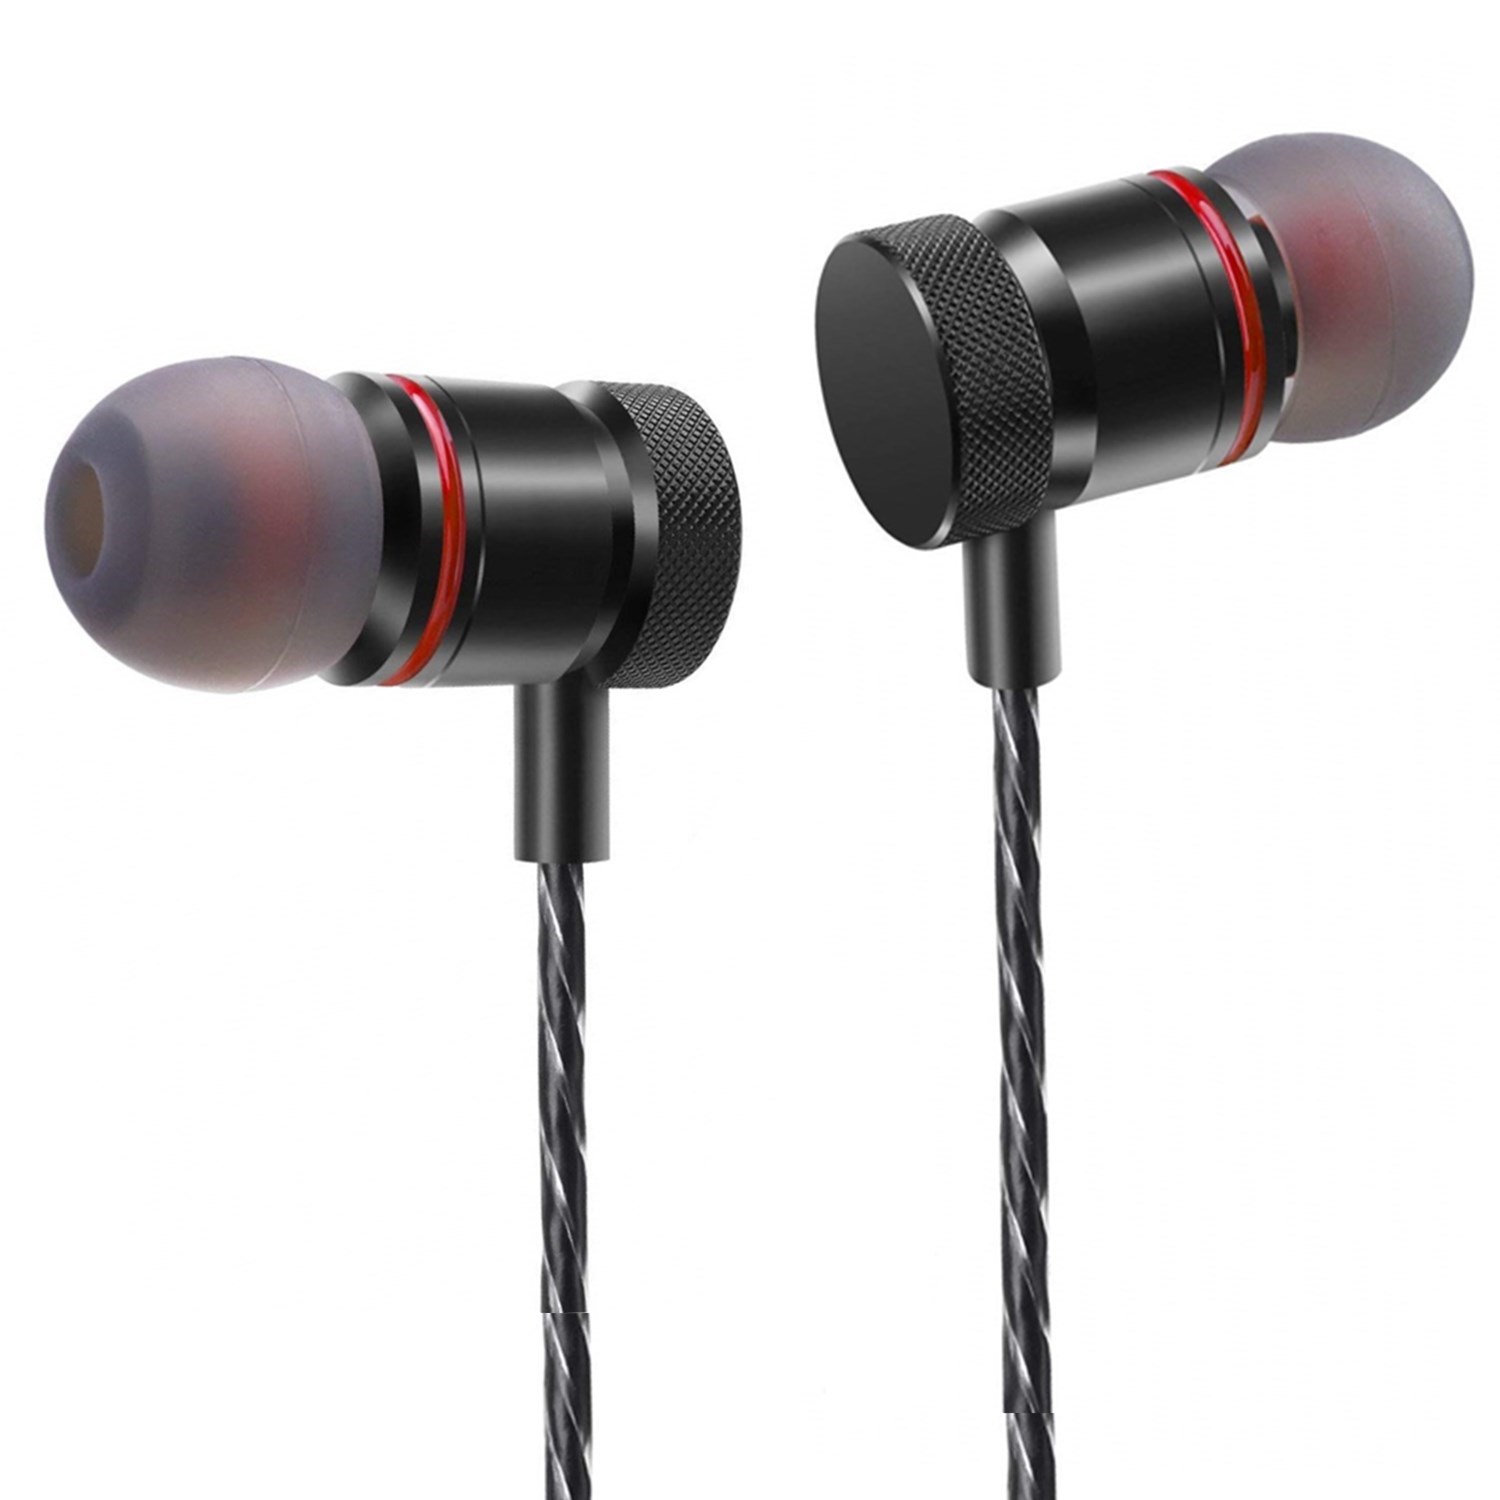 AUXCOO WE01 Magnetic Metal Housing In-ear Earphones with Microphone